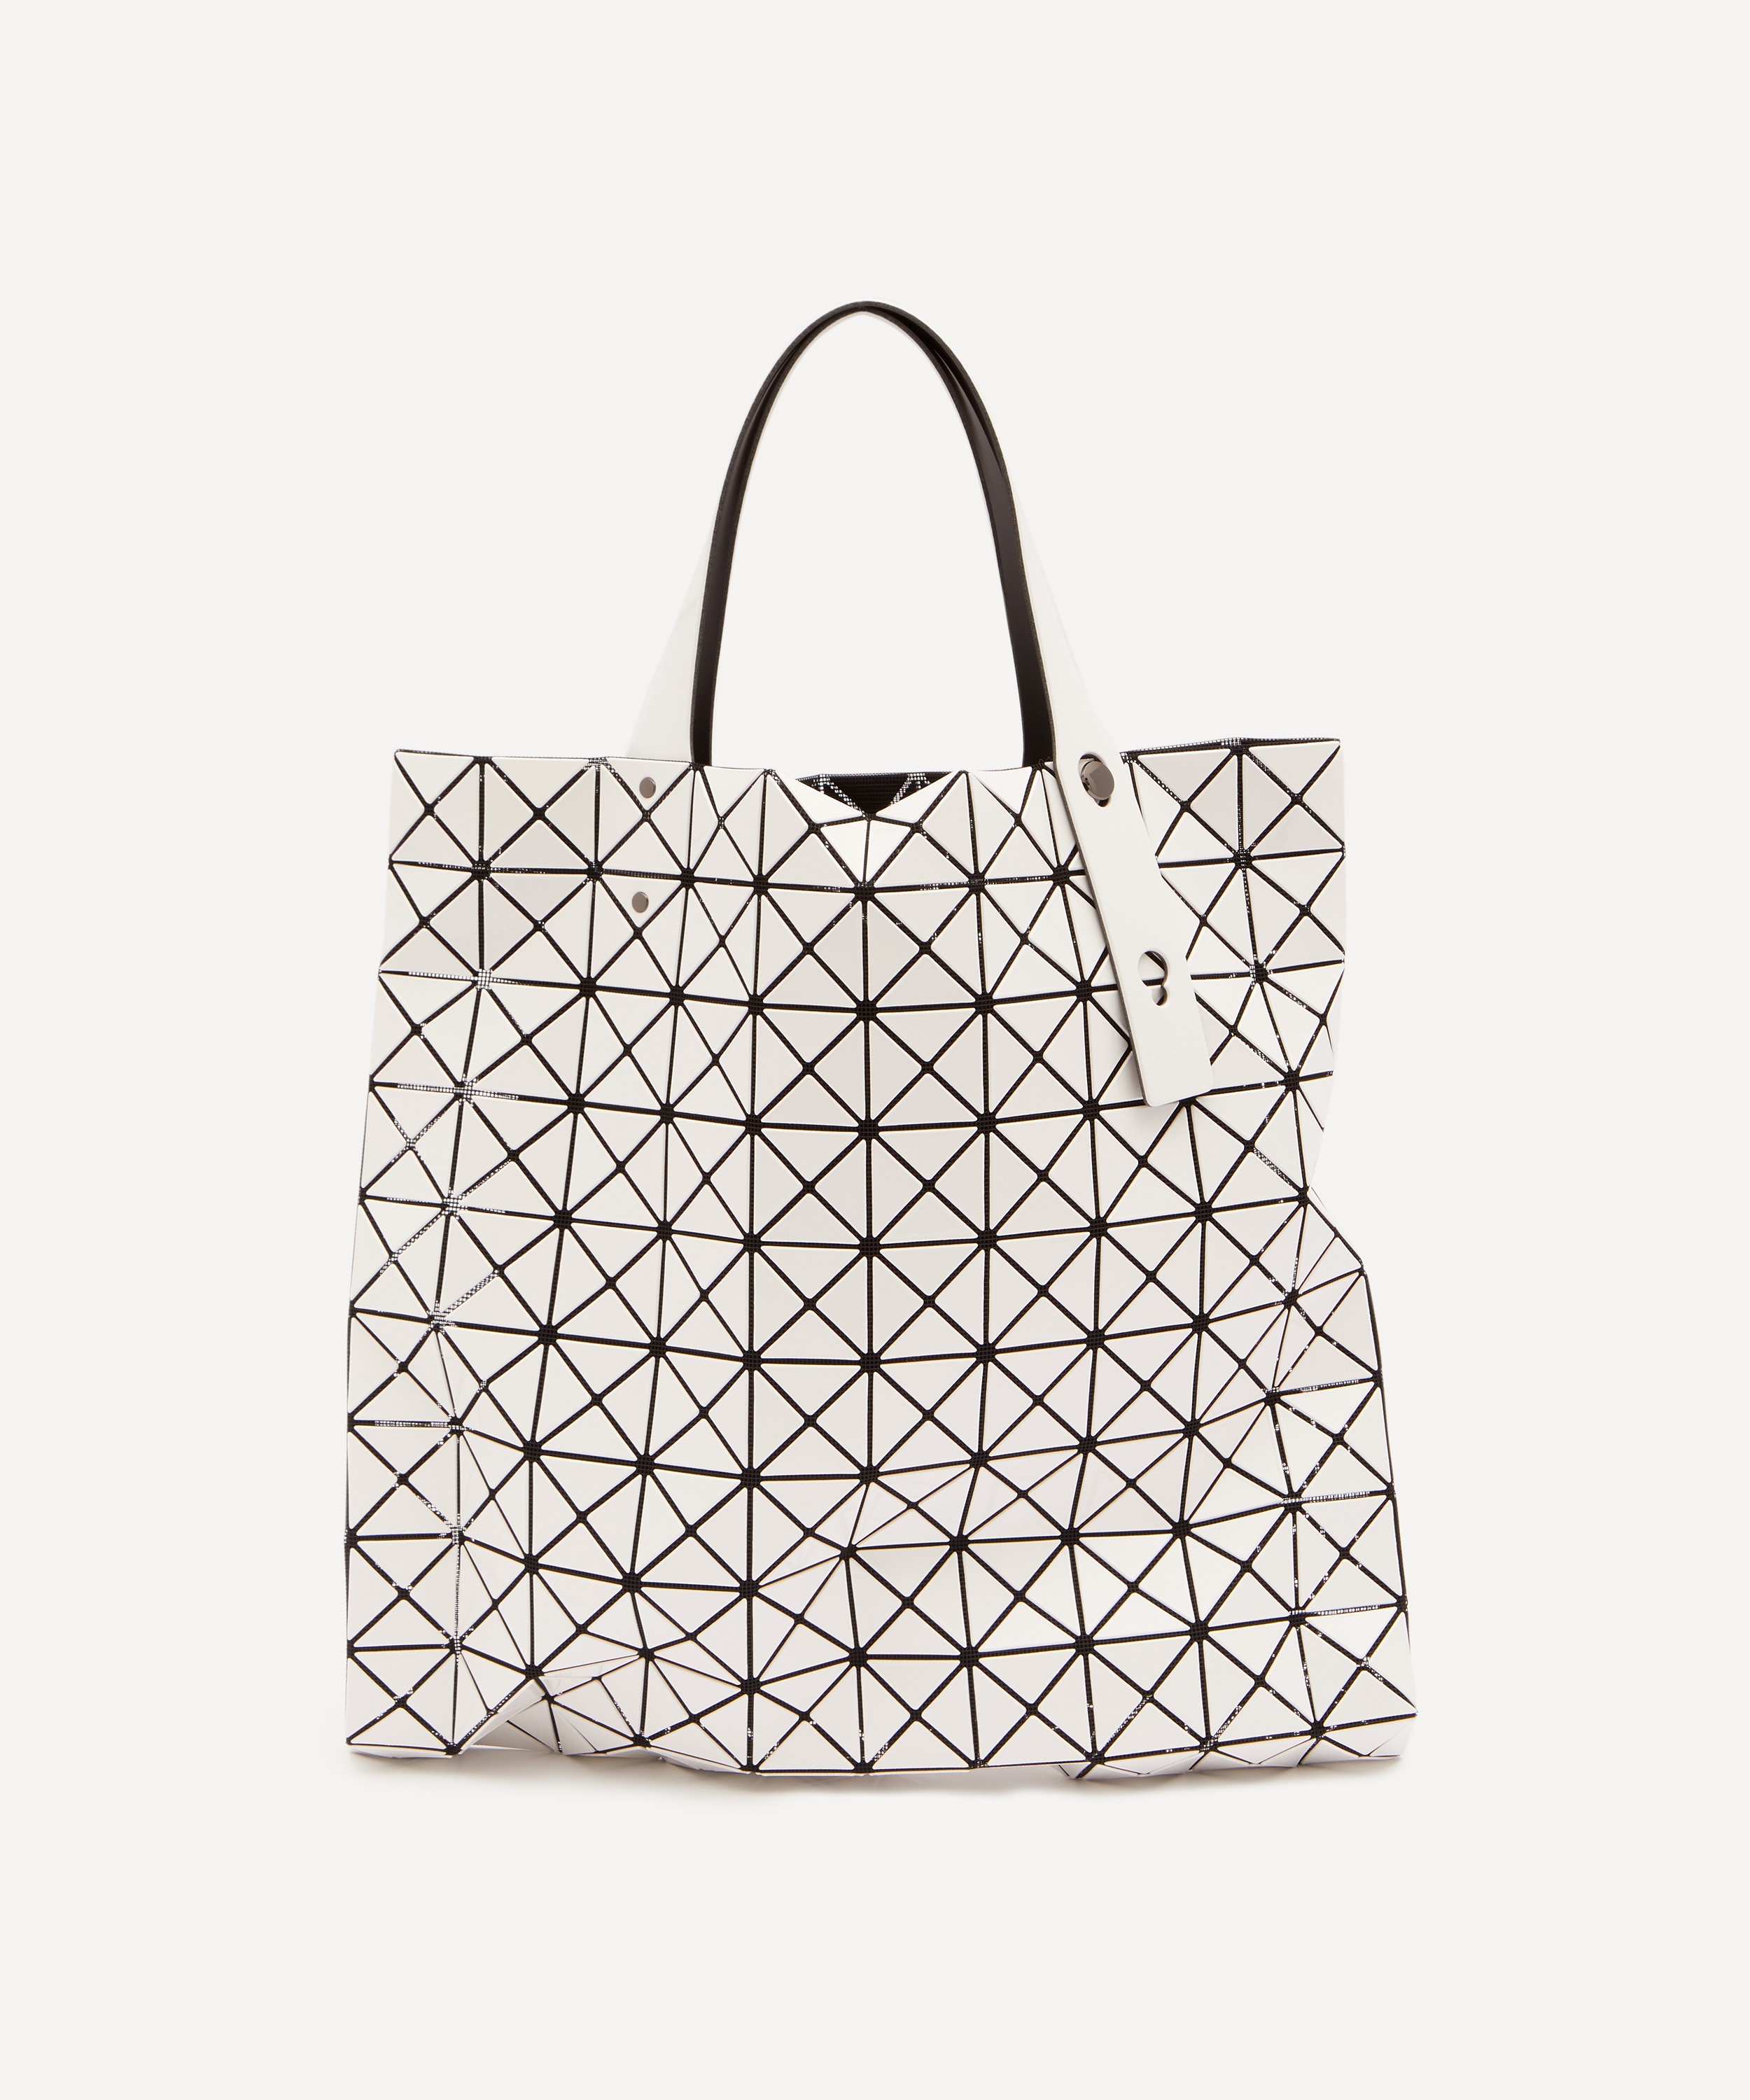 100% Authentic BAOBAO Issey Miyake classic shoulder bag Casual